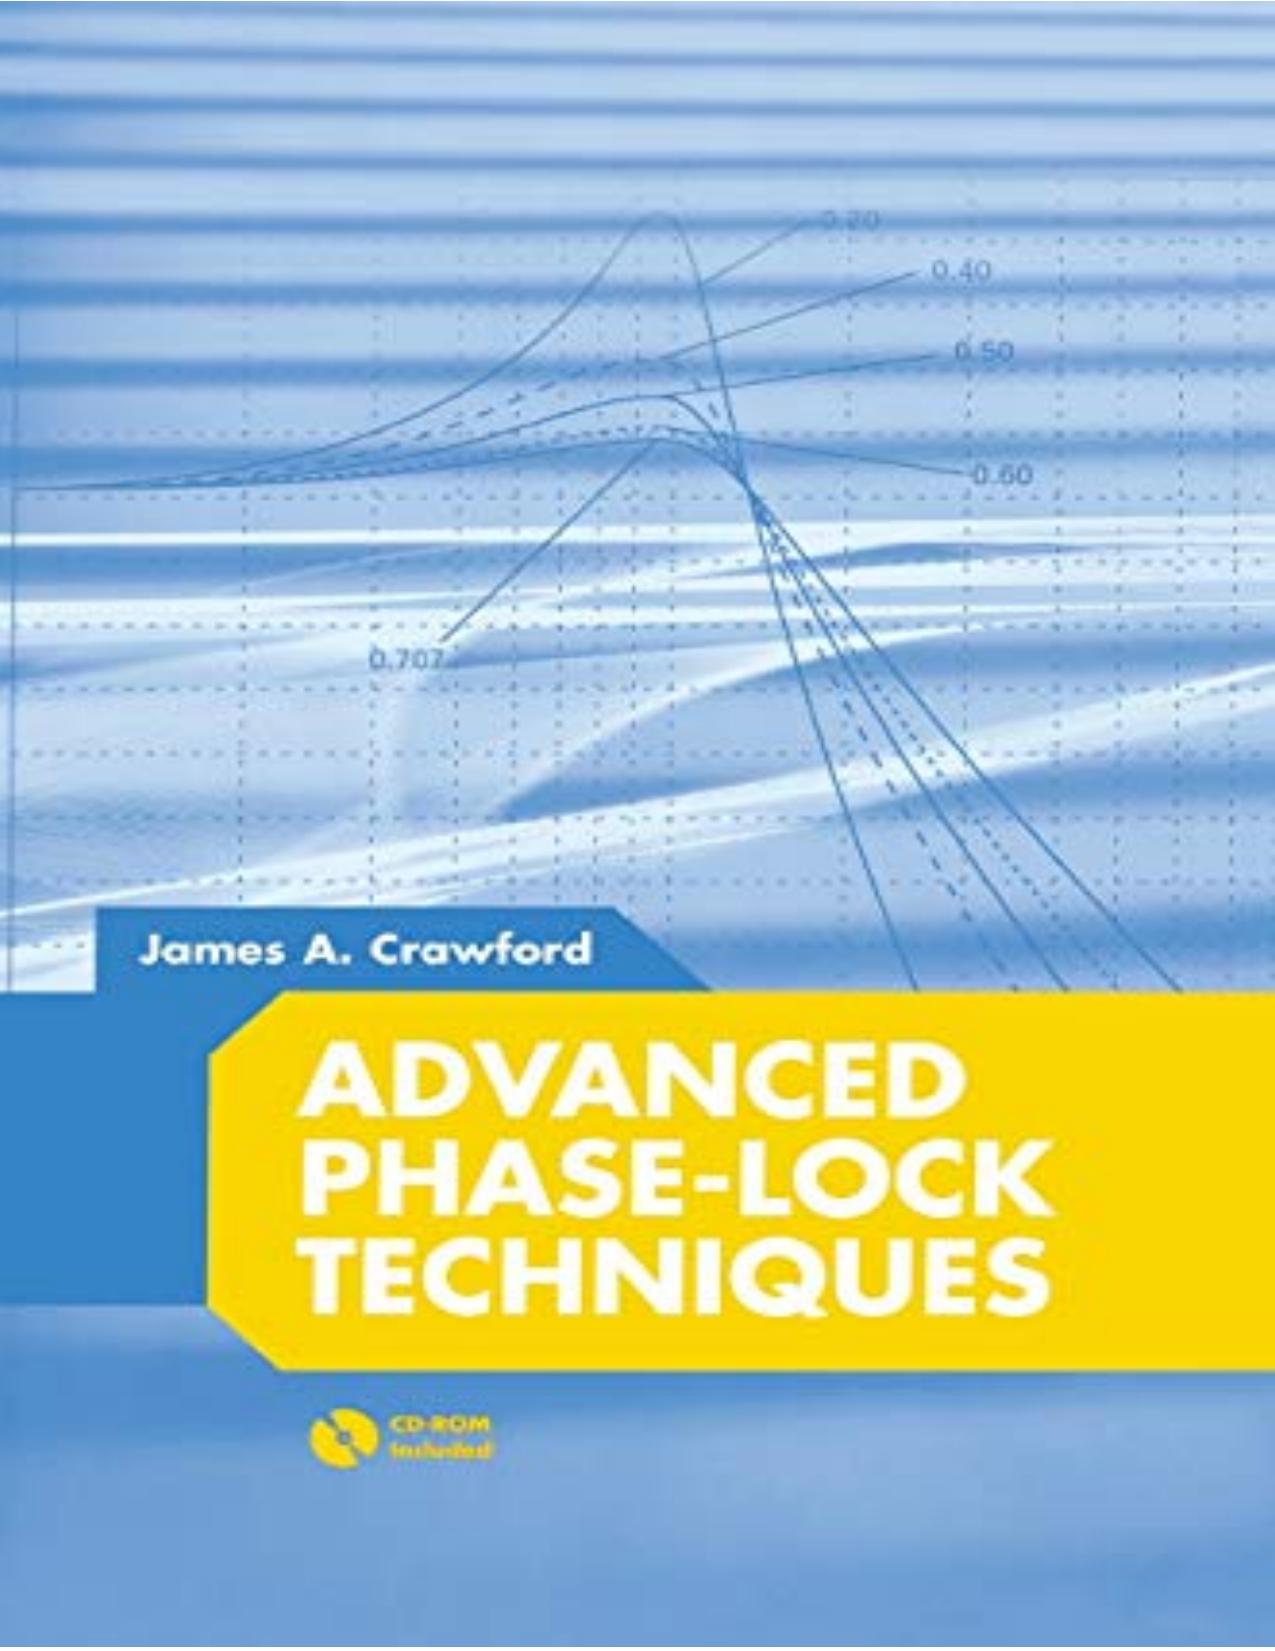 Advanced Phase-Lock Techniques by James A. Crawford